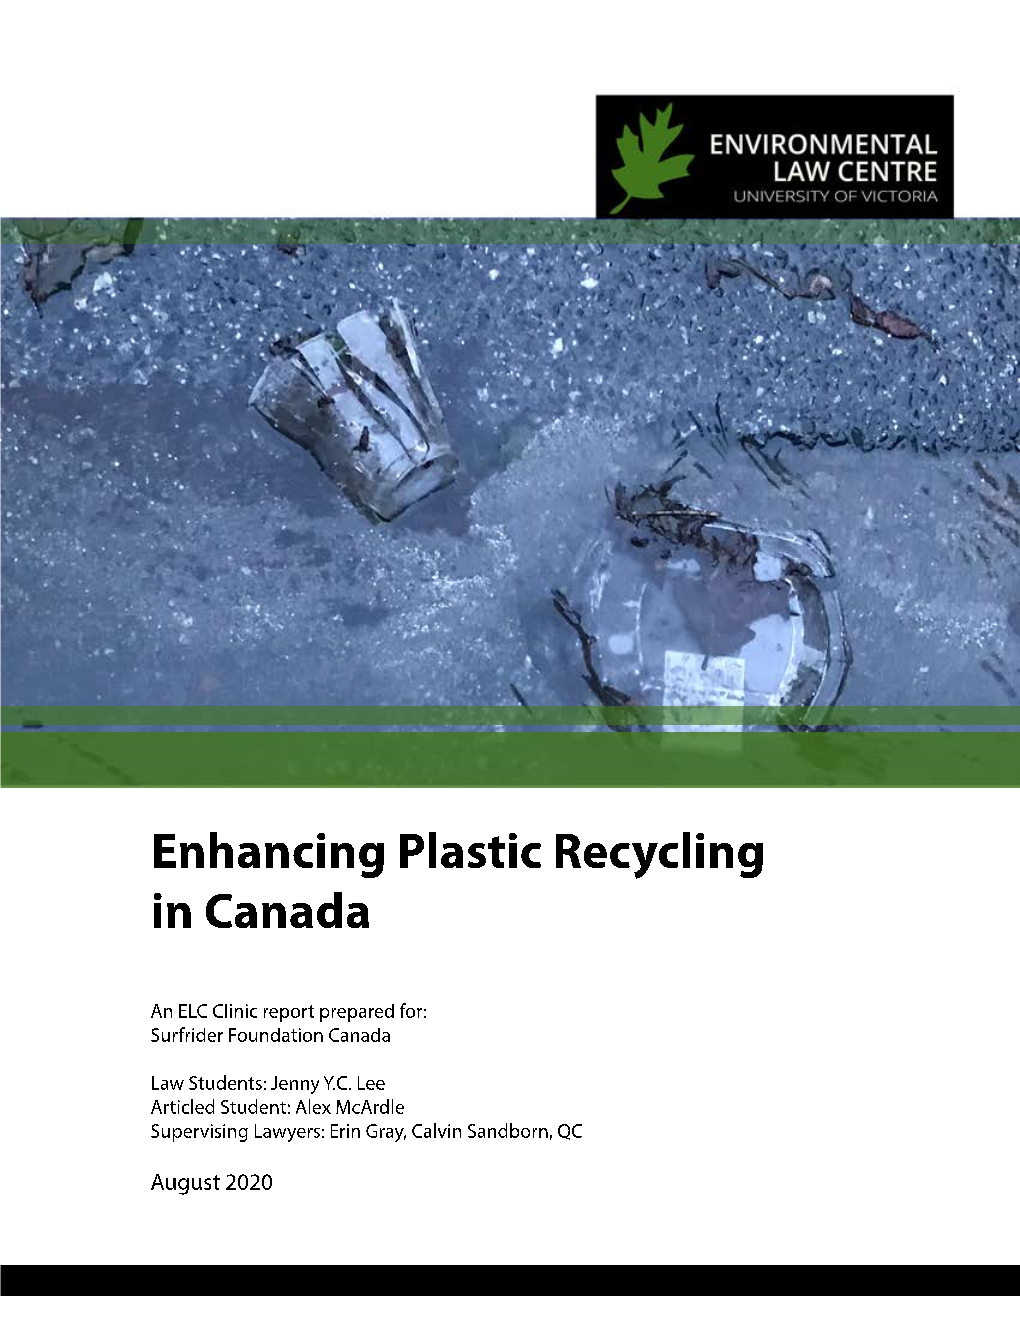 Enhancing Plastic Recycling in Canada